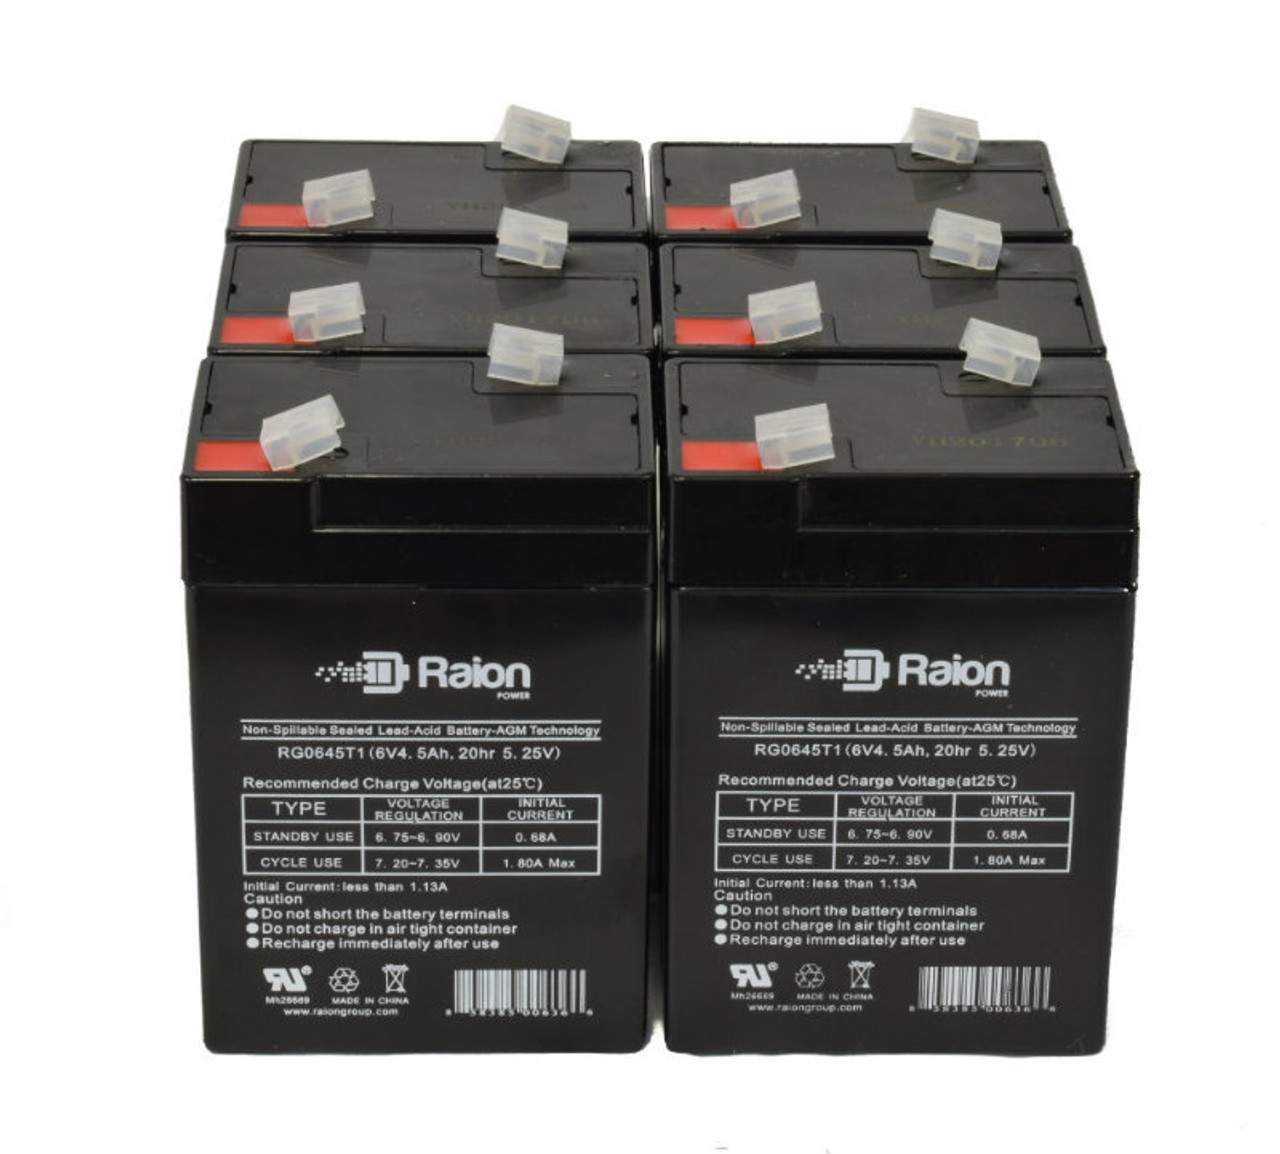 Raion Power 6 Volt 4.5Ah RG0645T1 Replacement Battery for FirstPower FP650 - 6 Pack